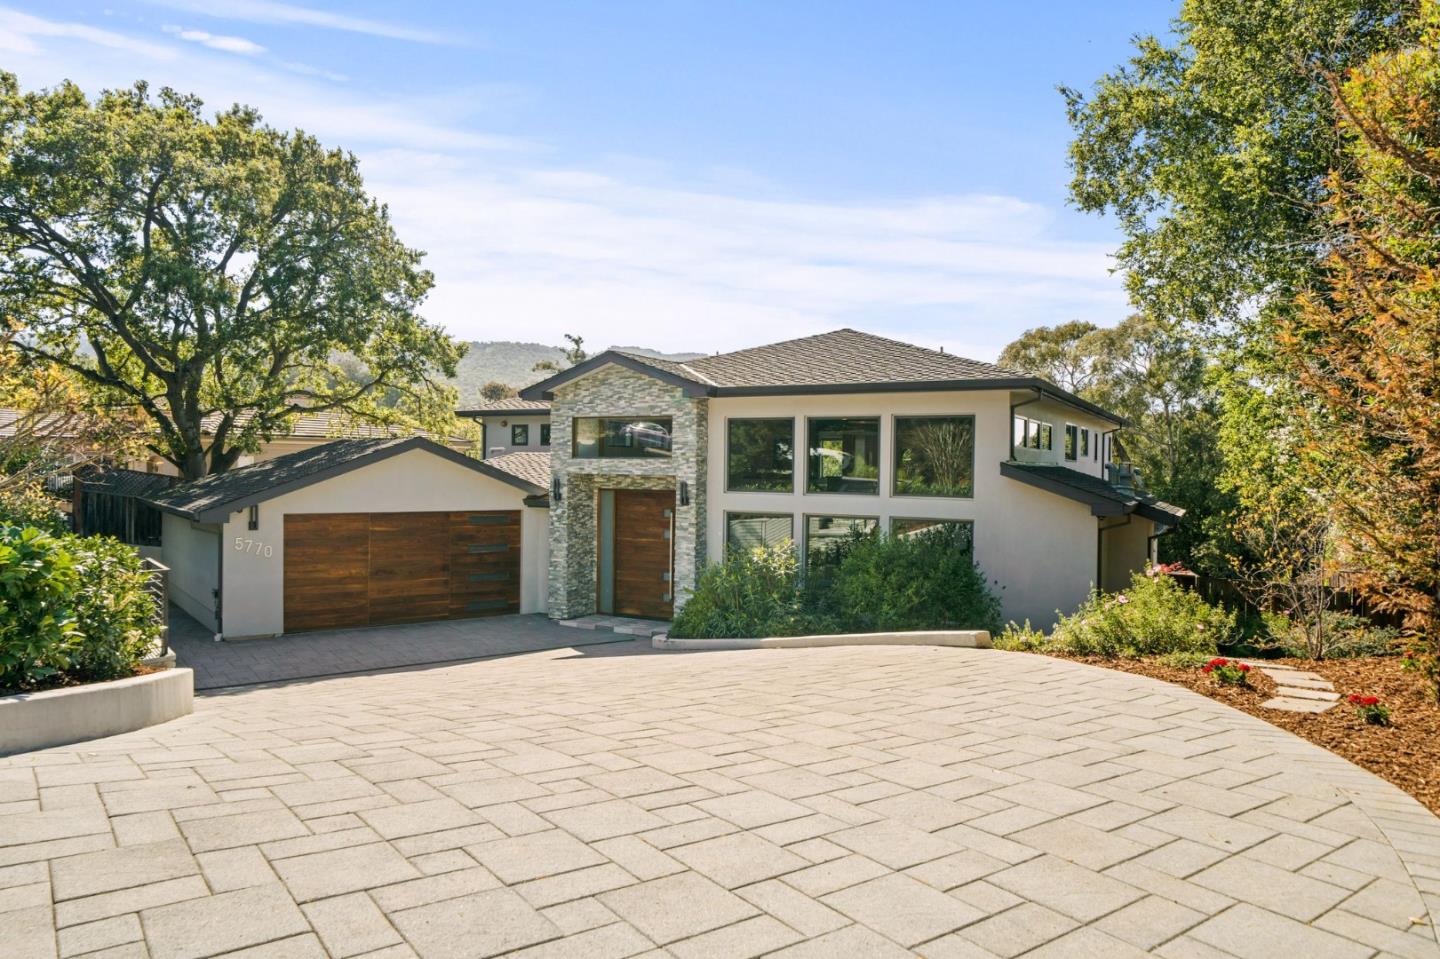 Welcome to your Los Altos Oasis! Built in 2015, this custom home boasts 5 bedrooms, 2 offices, an oversized basement, 5 full bathrooms, 2 powder rooms across 6,451 square feet of living space. Enjoy a half-acre lot with stunning tree-lined views. Inside, a grand entry leads to a living room with a cozy fireplace. The great room seamlessly combines kitchen, dining, and family areas, flowing to the patio and backyard. Hardwood-inspired tiles grace the floors, while the kitchen features high-end Wolf/Sub-Zero appliances and a walk-in pantry. The basement offers entertainment as a movie theater, bar or game room. Retreat to the primary bedroom with views, a walk-in closet, and a luxurious bathroom. Top-rated schools and quick access to private schools make this location ideal. Outside, a pool, jacuzzi, and multiple sitting areas await. Don't miss your chance to call this meticulously crafted home yours!